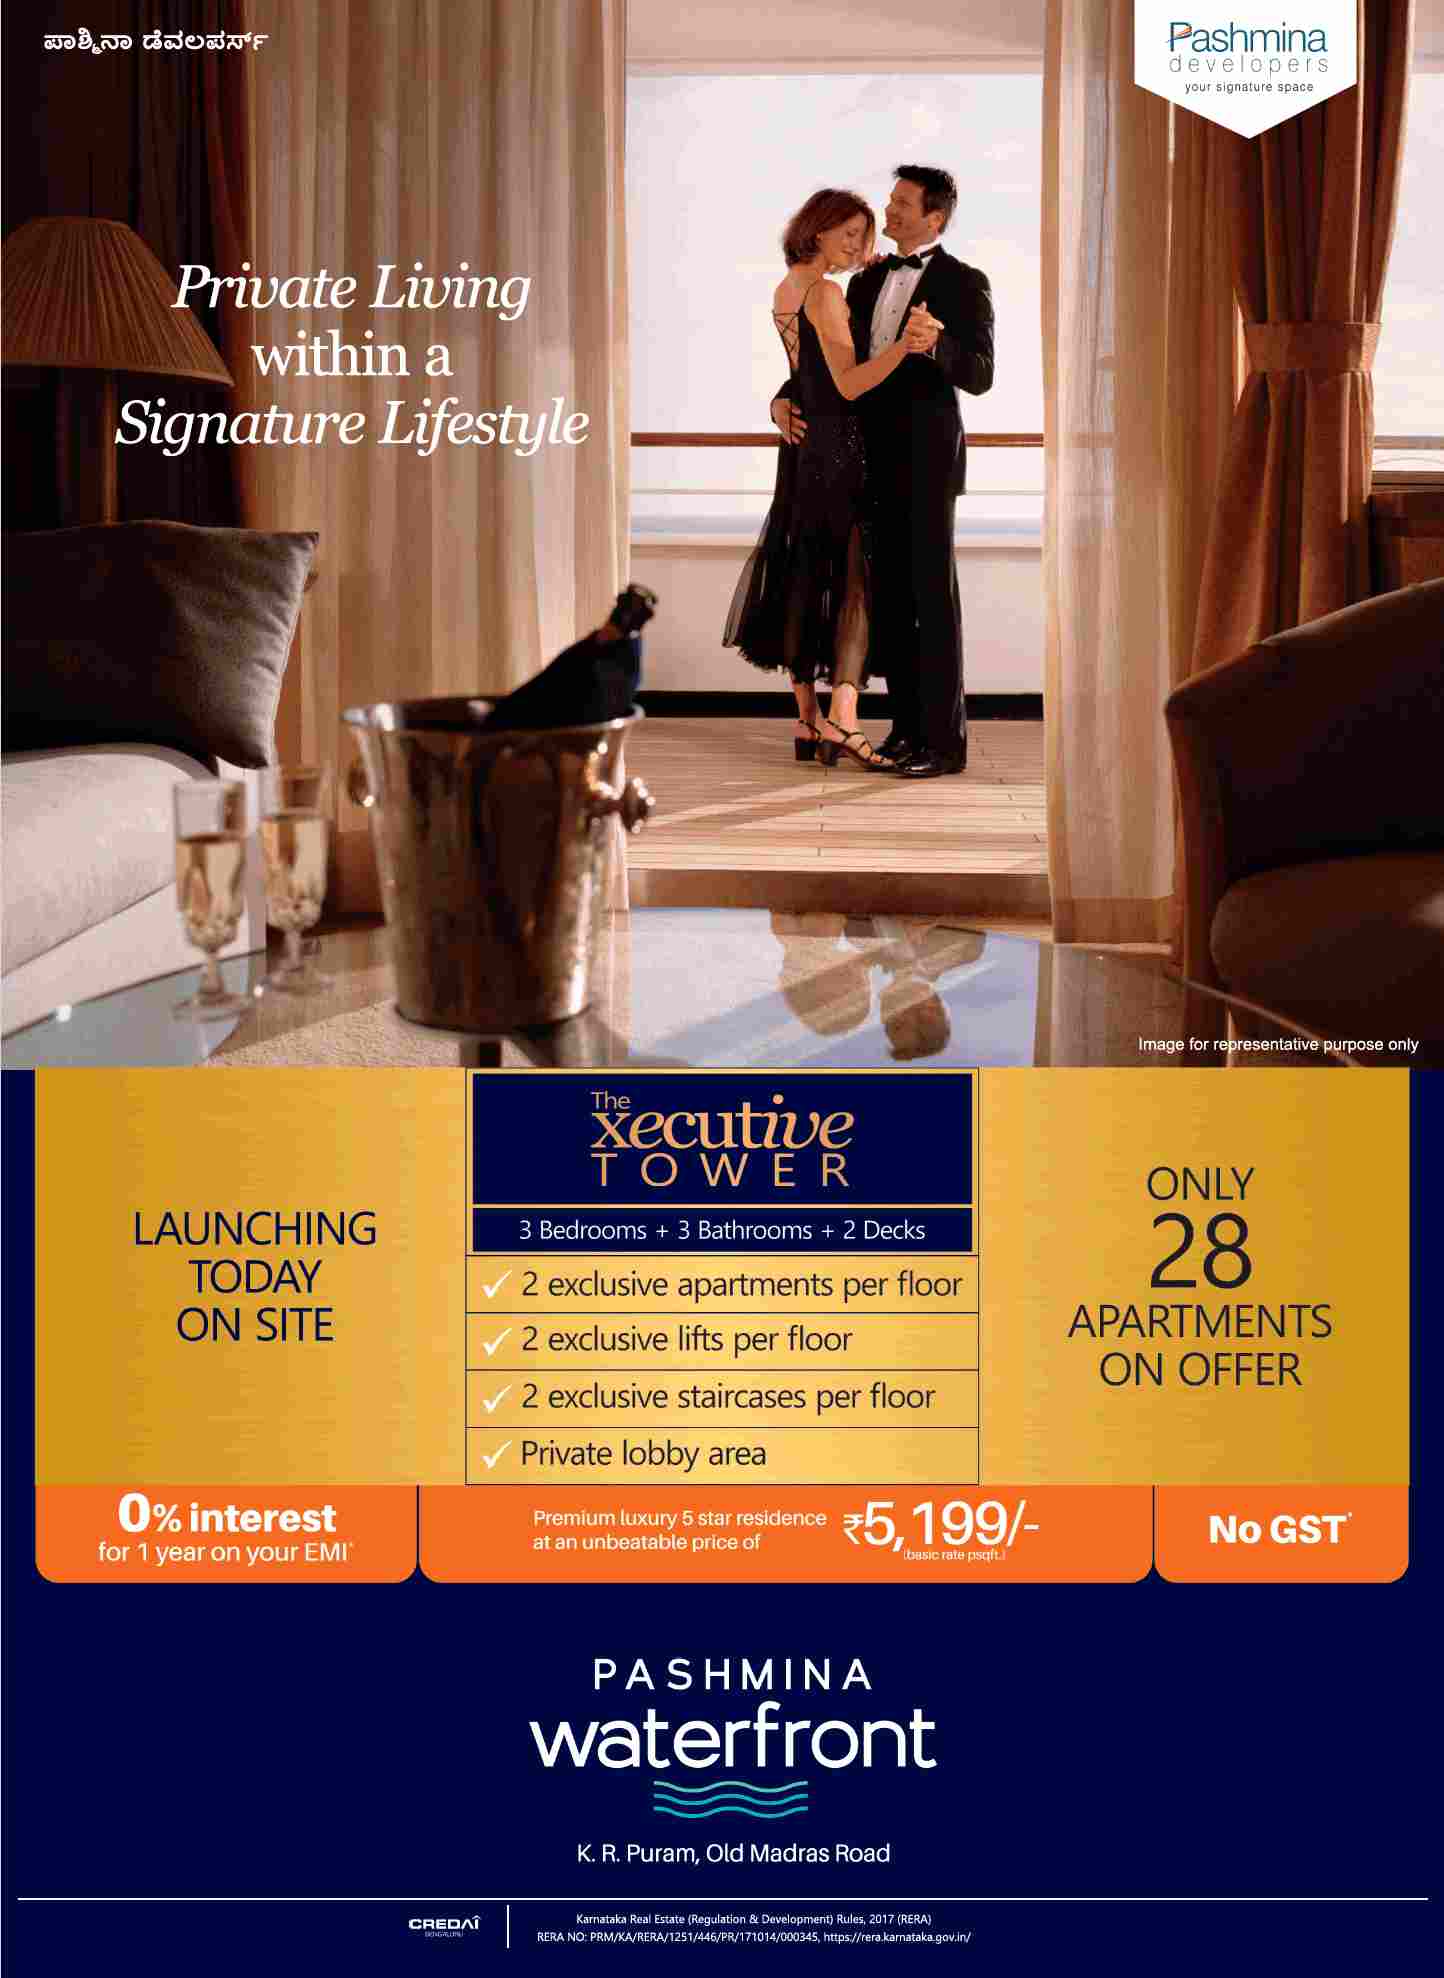 Launching the Xecutive Tower at Pashmina Waterfront in Bangalore Update